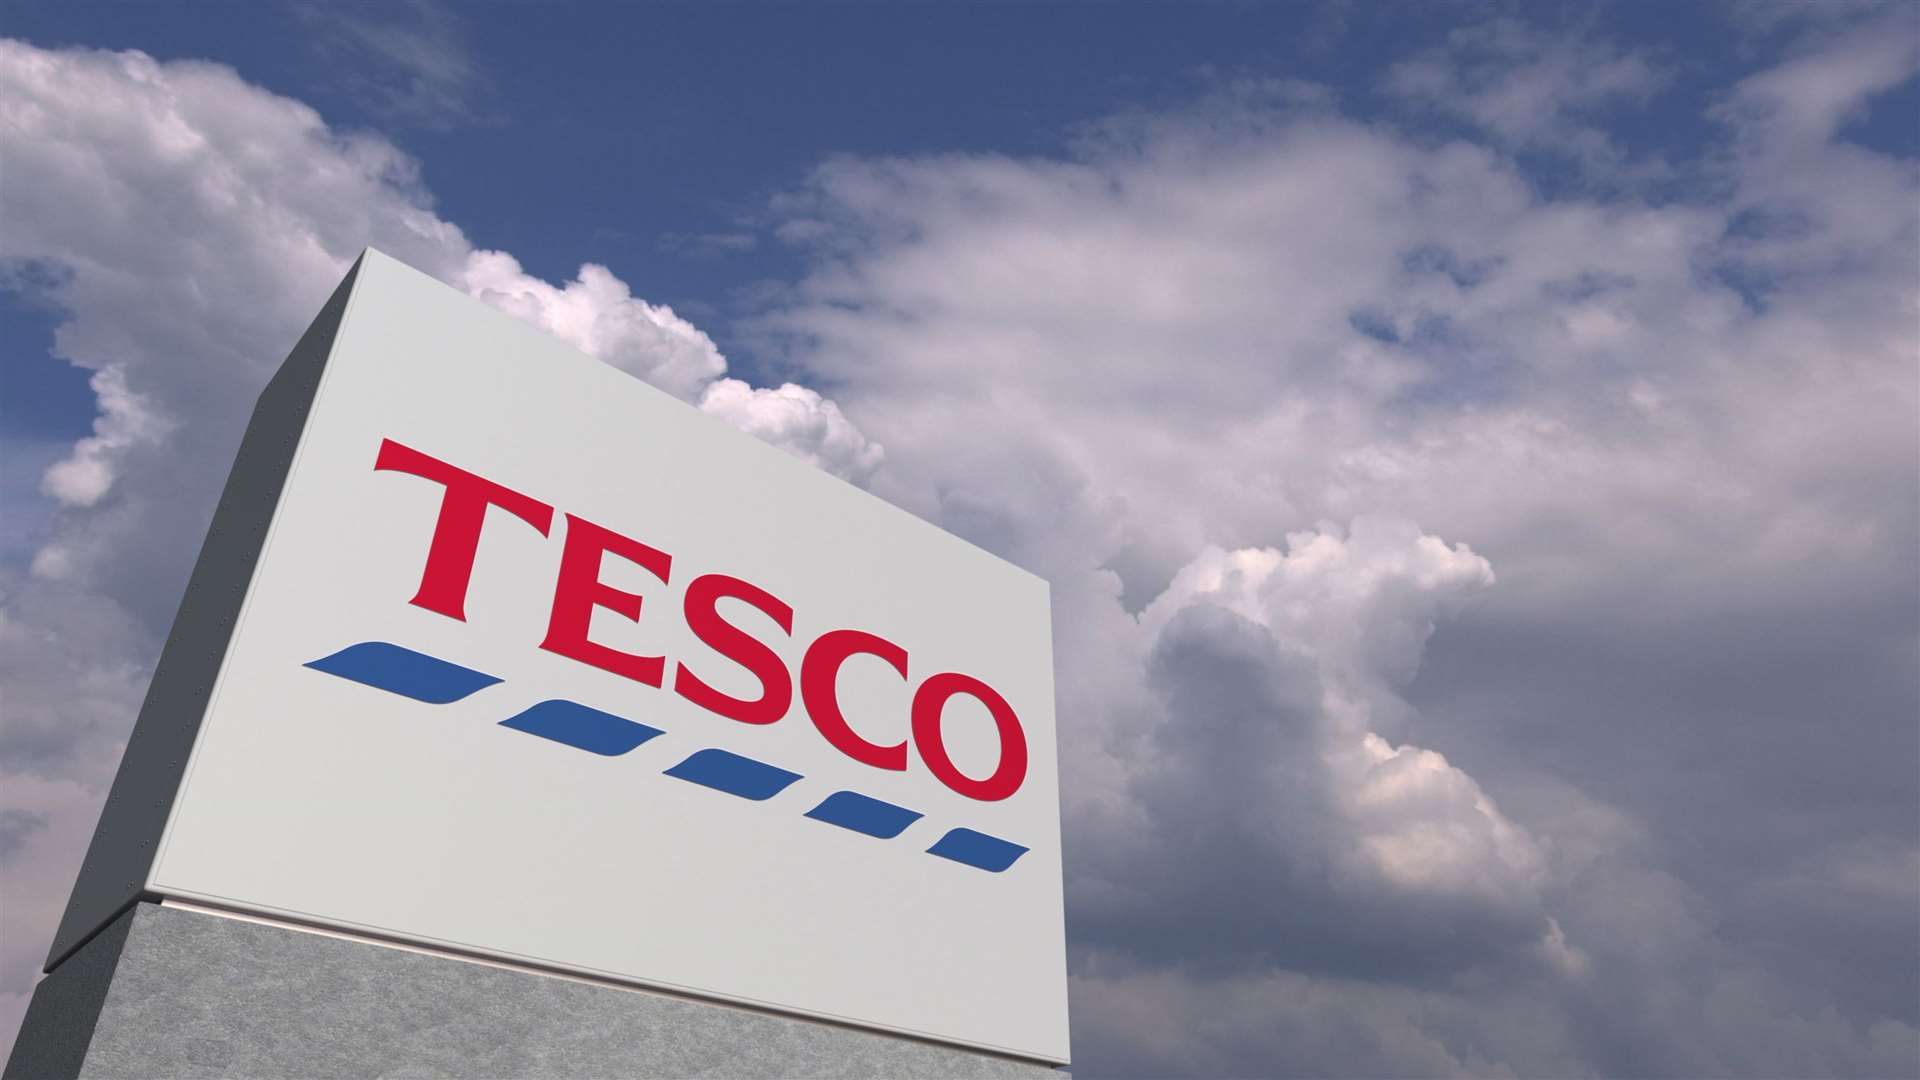 Tesco limits purchases of several products.